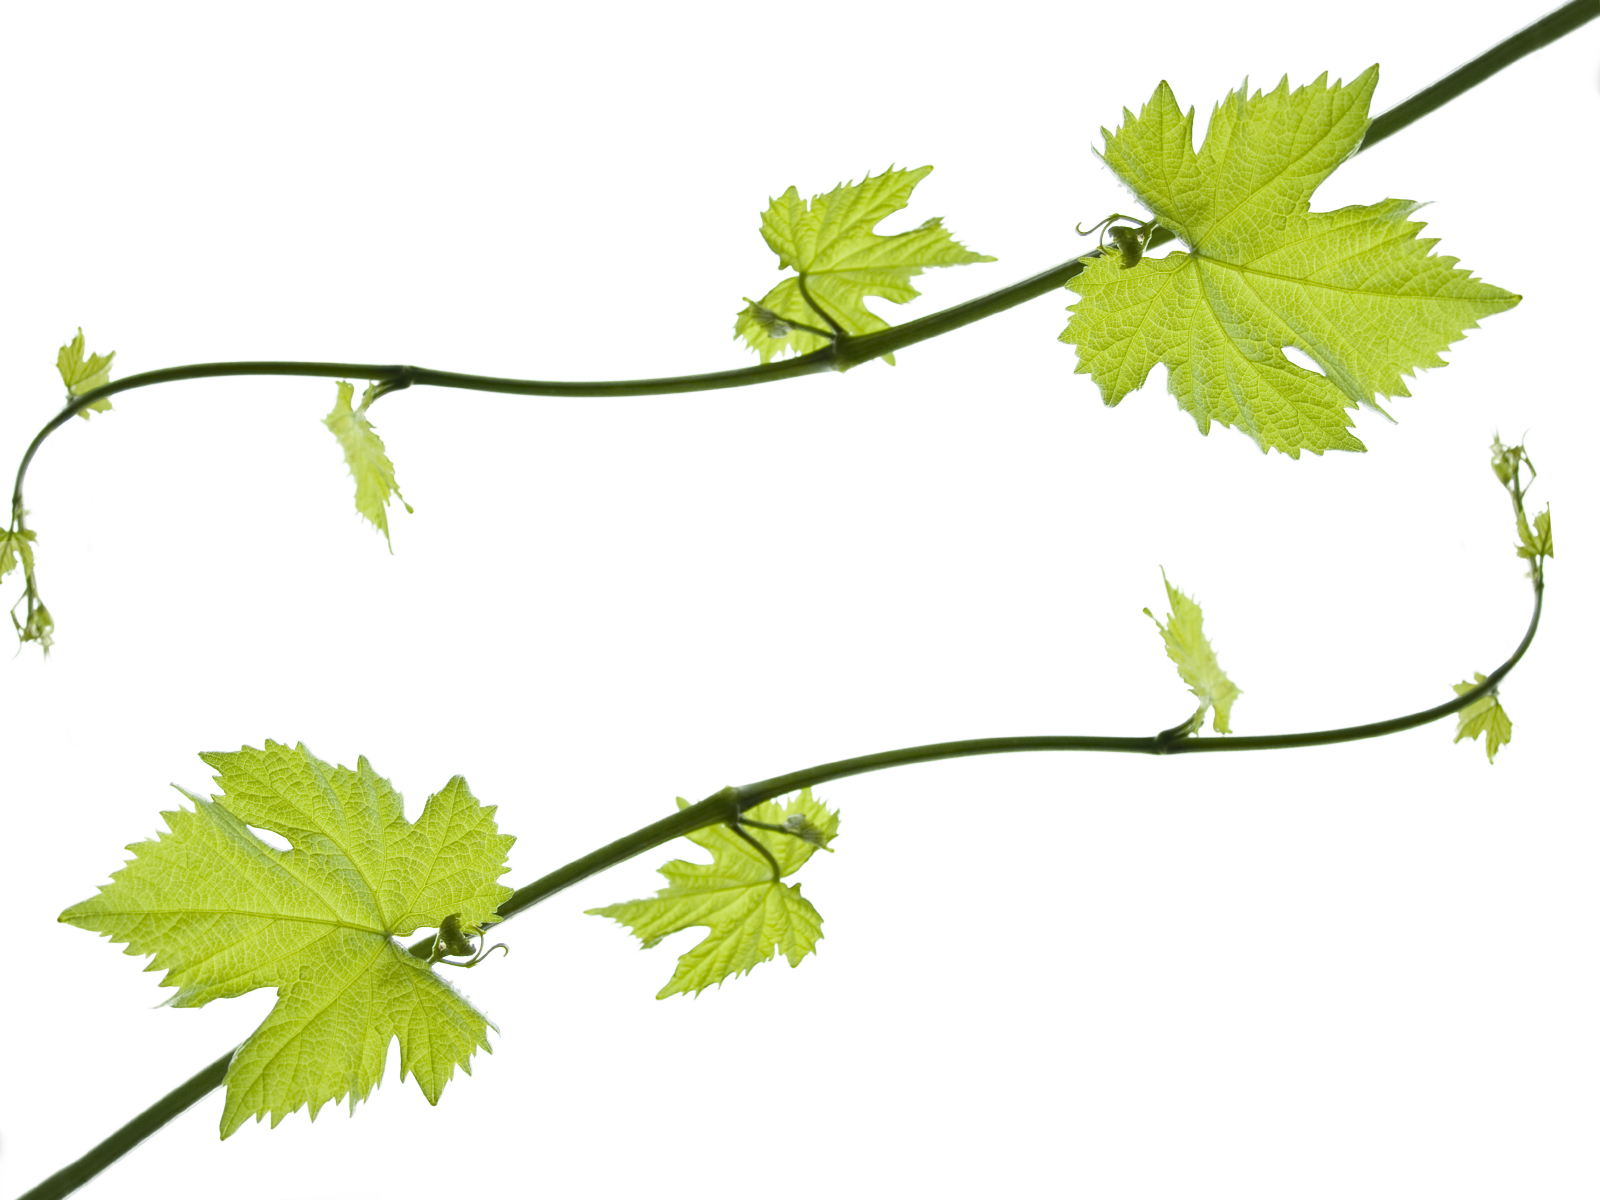 Grape Vine Png Hd Free - Grapevine Border   Clipart Library, Transparent background PNG HD thumbnail